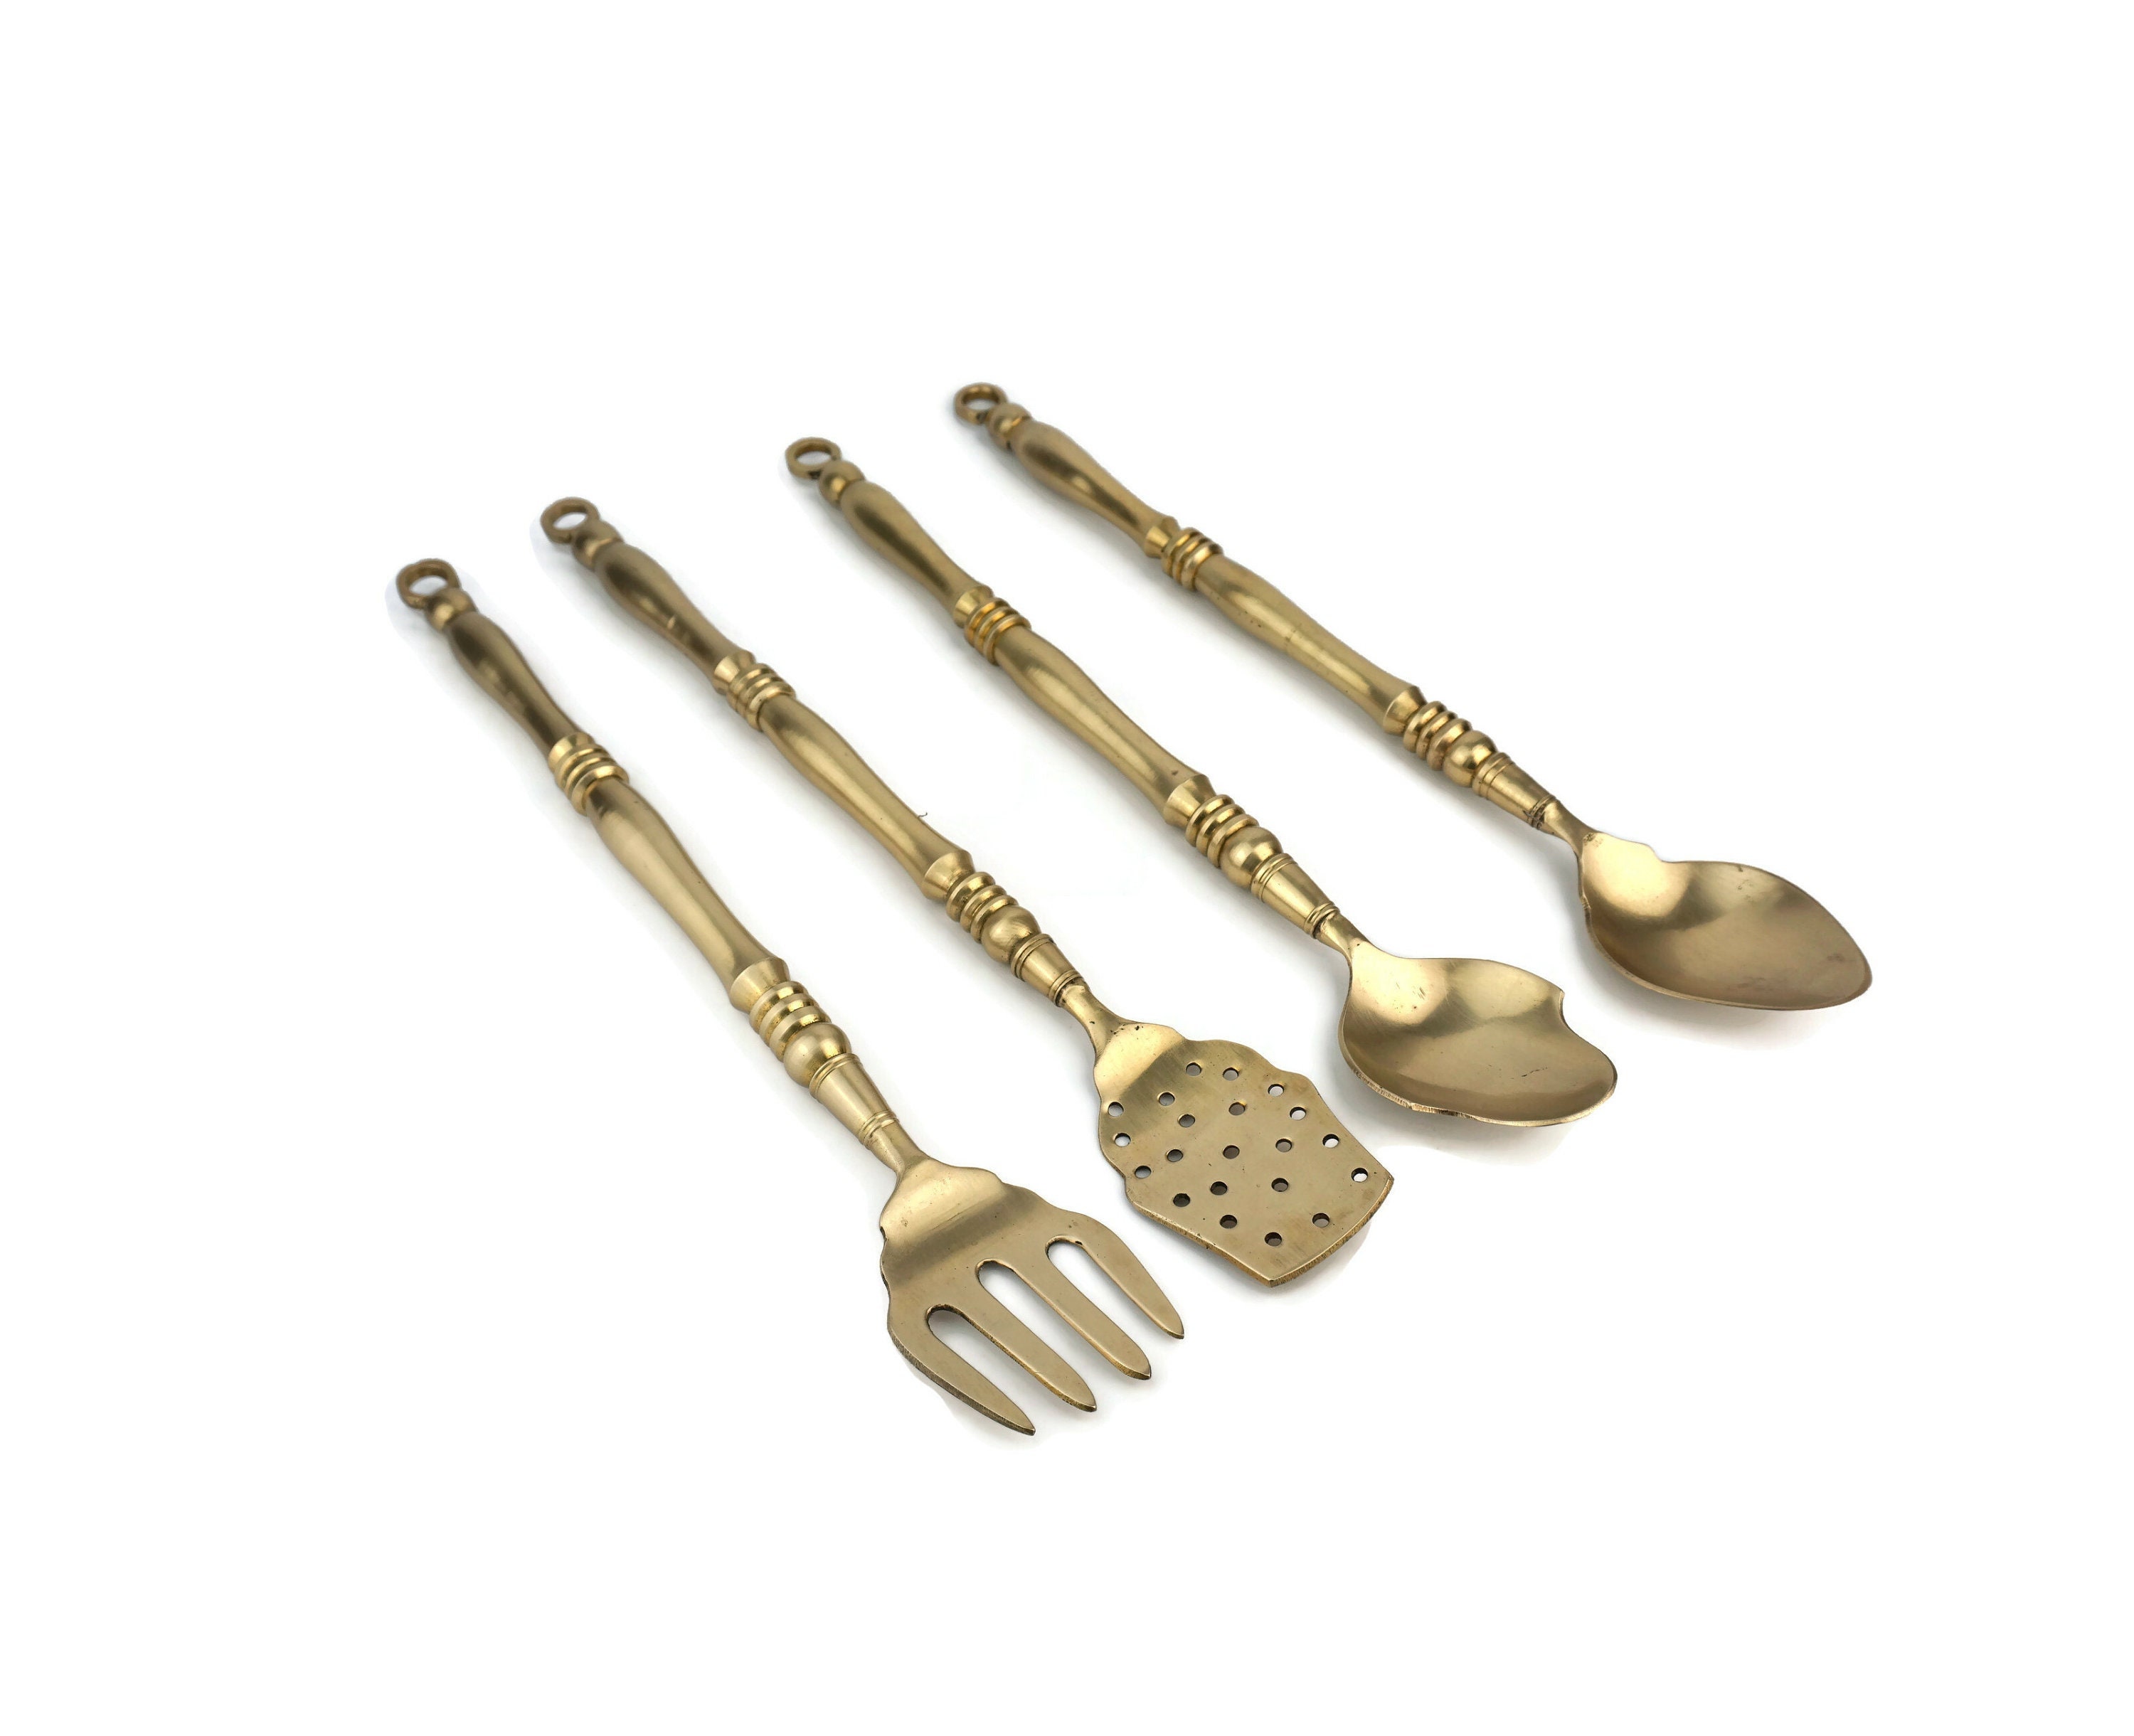 extra large brass kitchen utensils wall decor – old soul goods